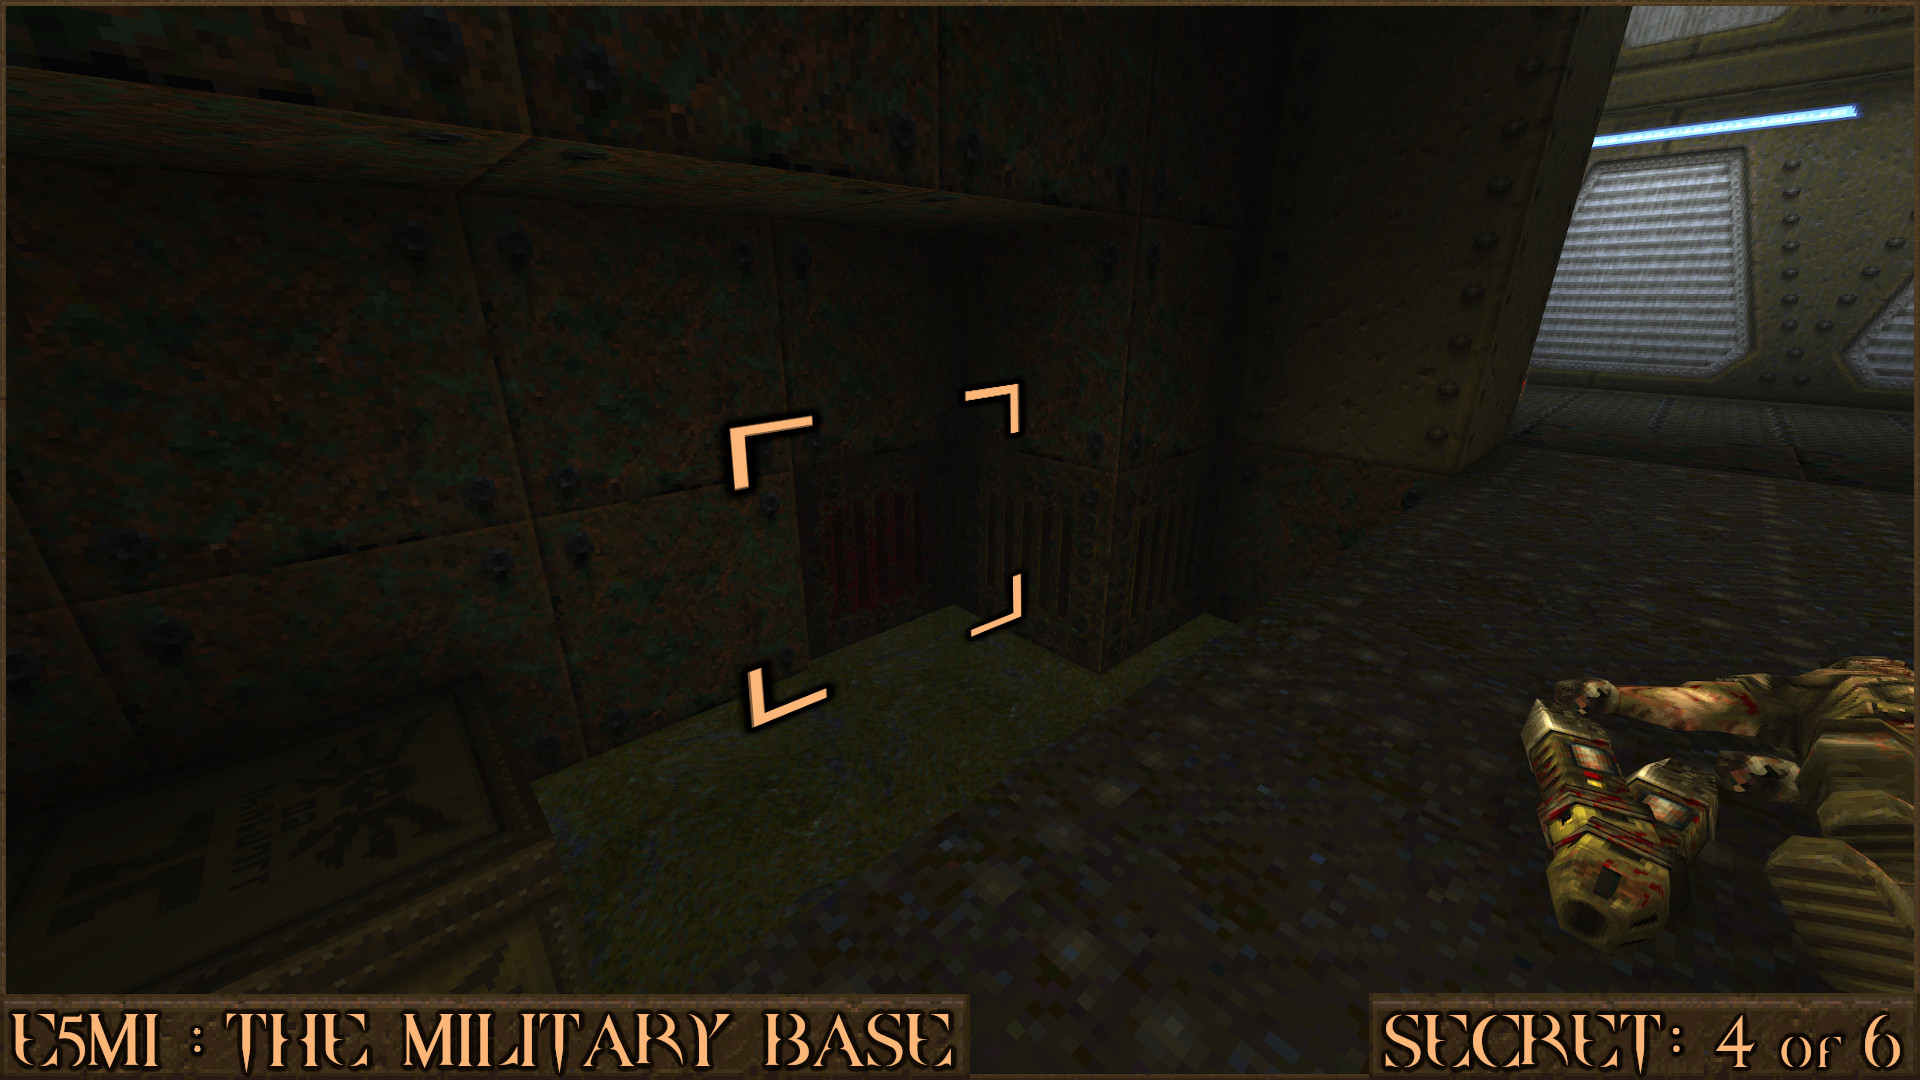 Quake Finding All Secrets in Quake Expansion pack: Dimension of the Past - E5M1: The Military Base - 9213A54